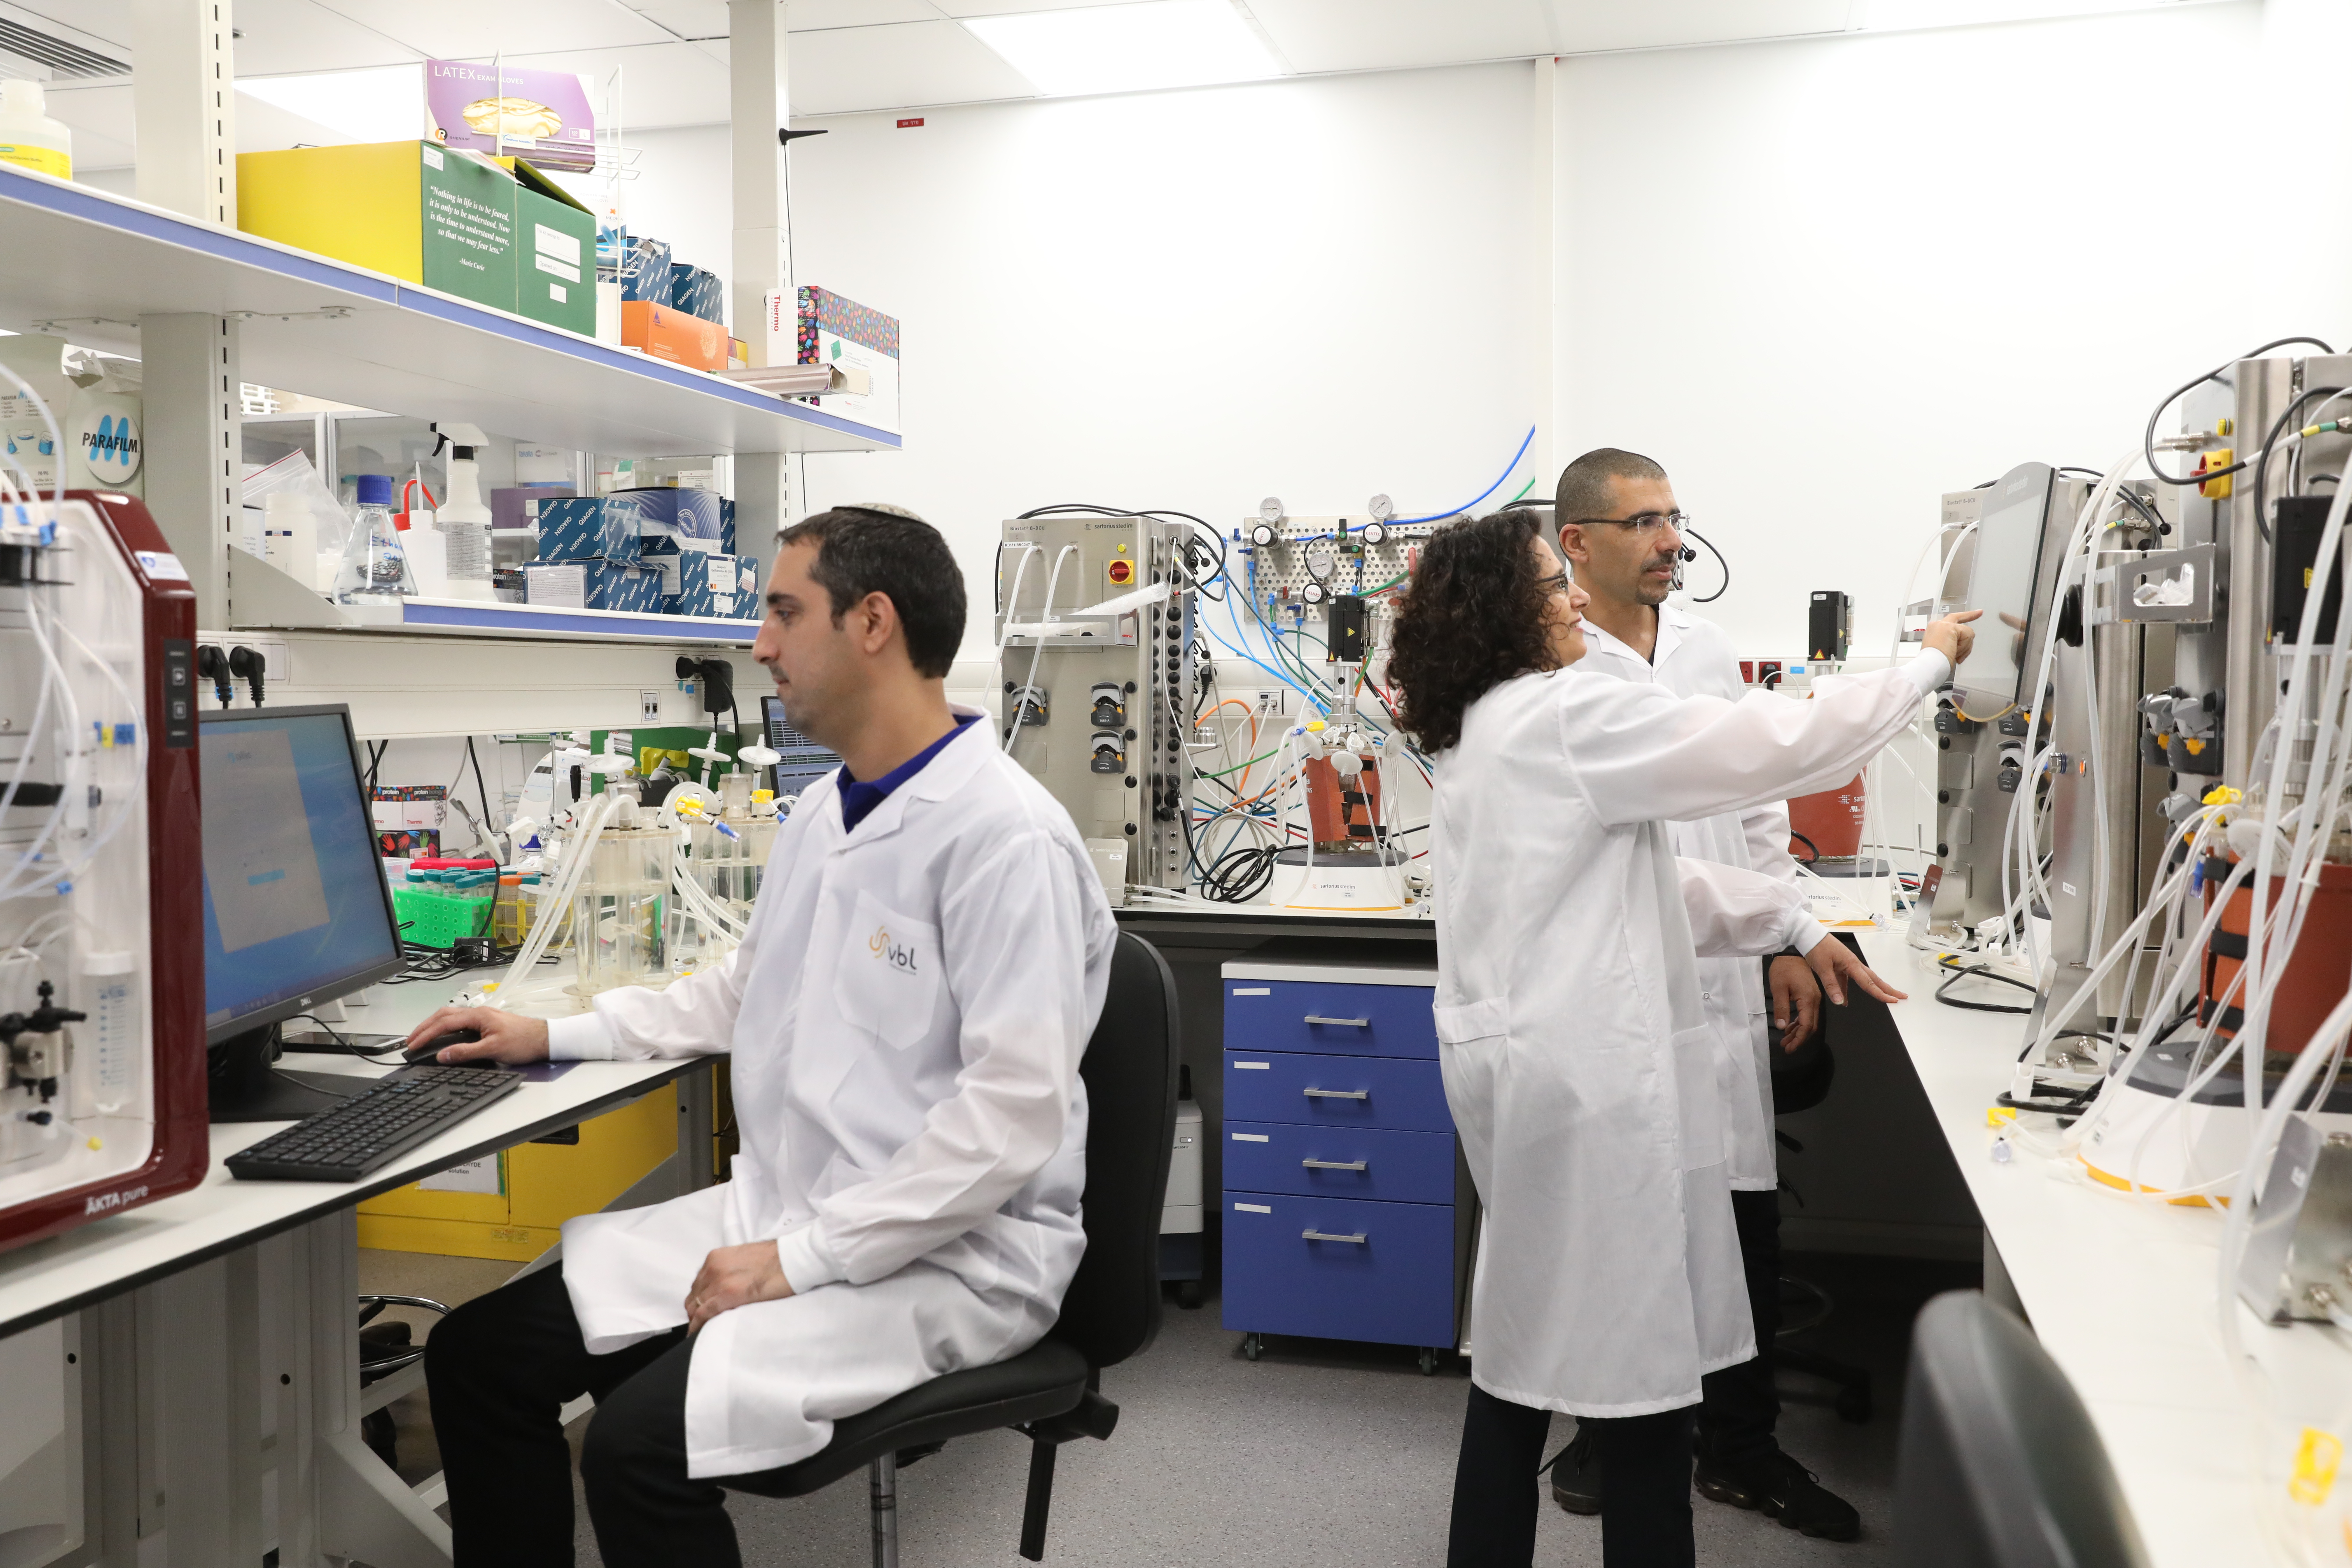 Lab technicians in lab hoodies, working in VBL’s facility in Modiin, Israel.